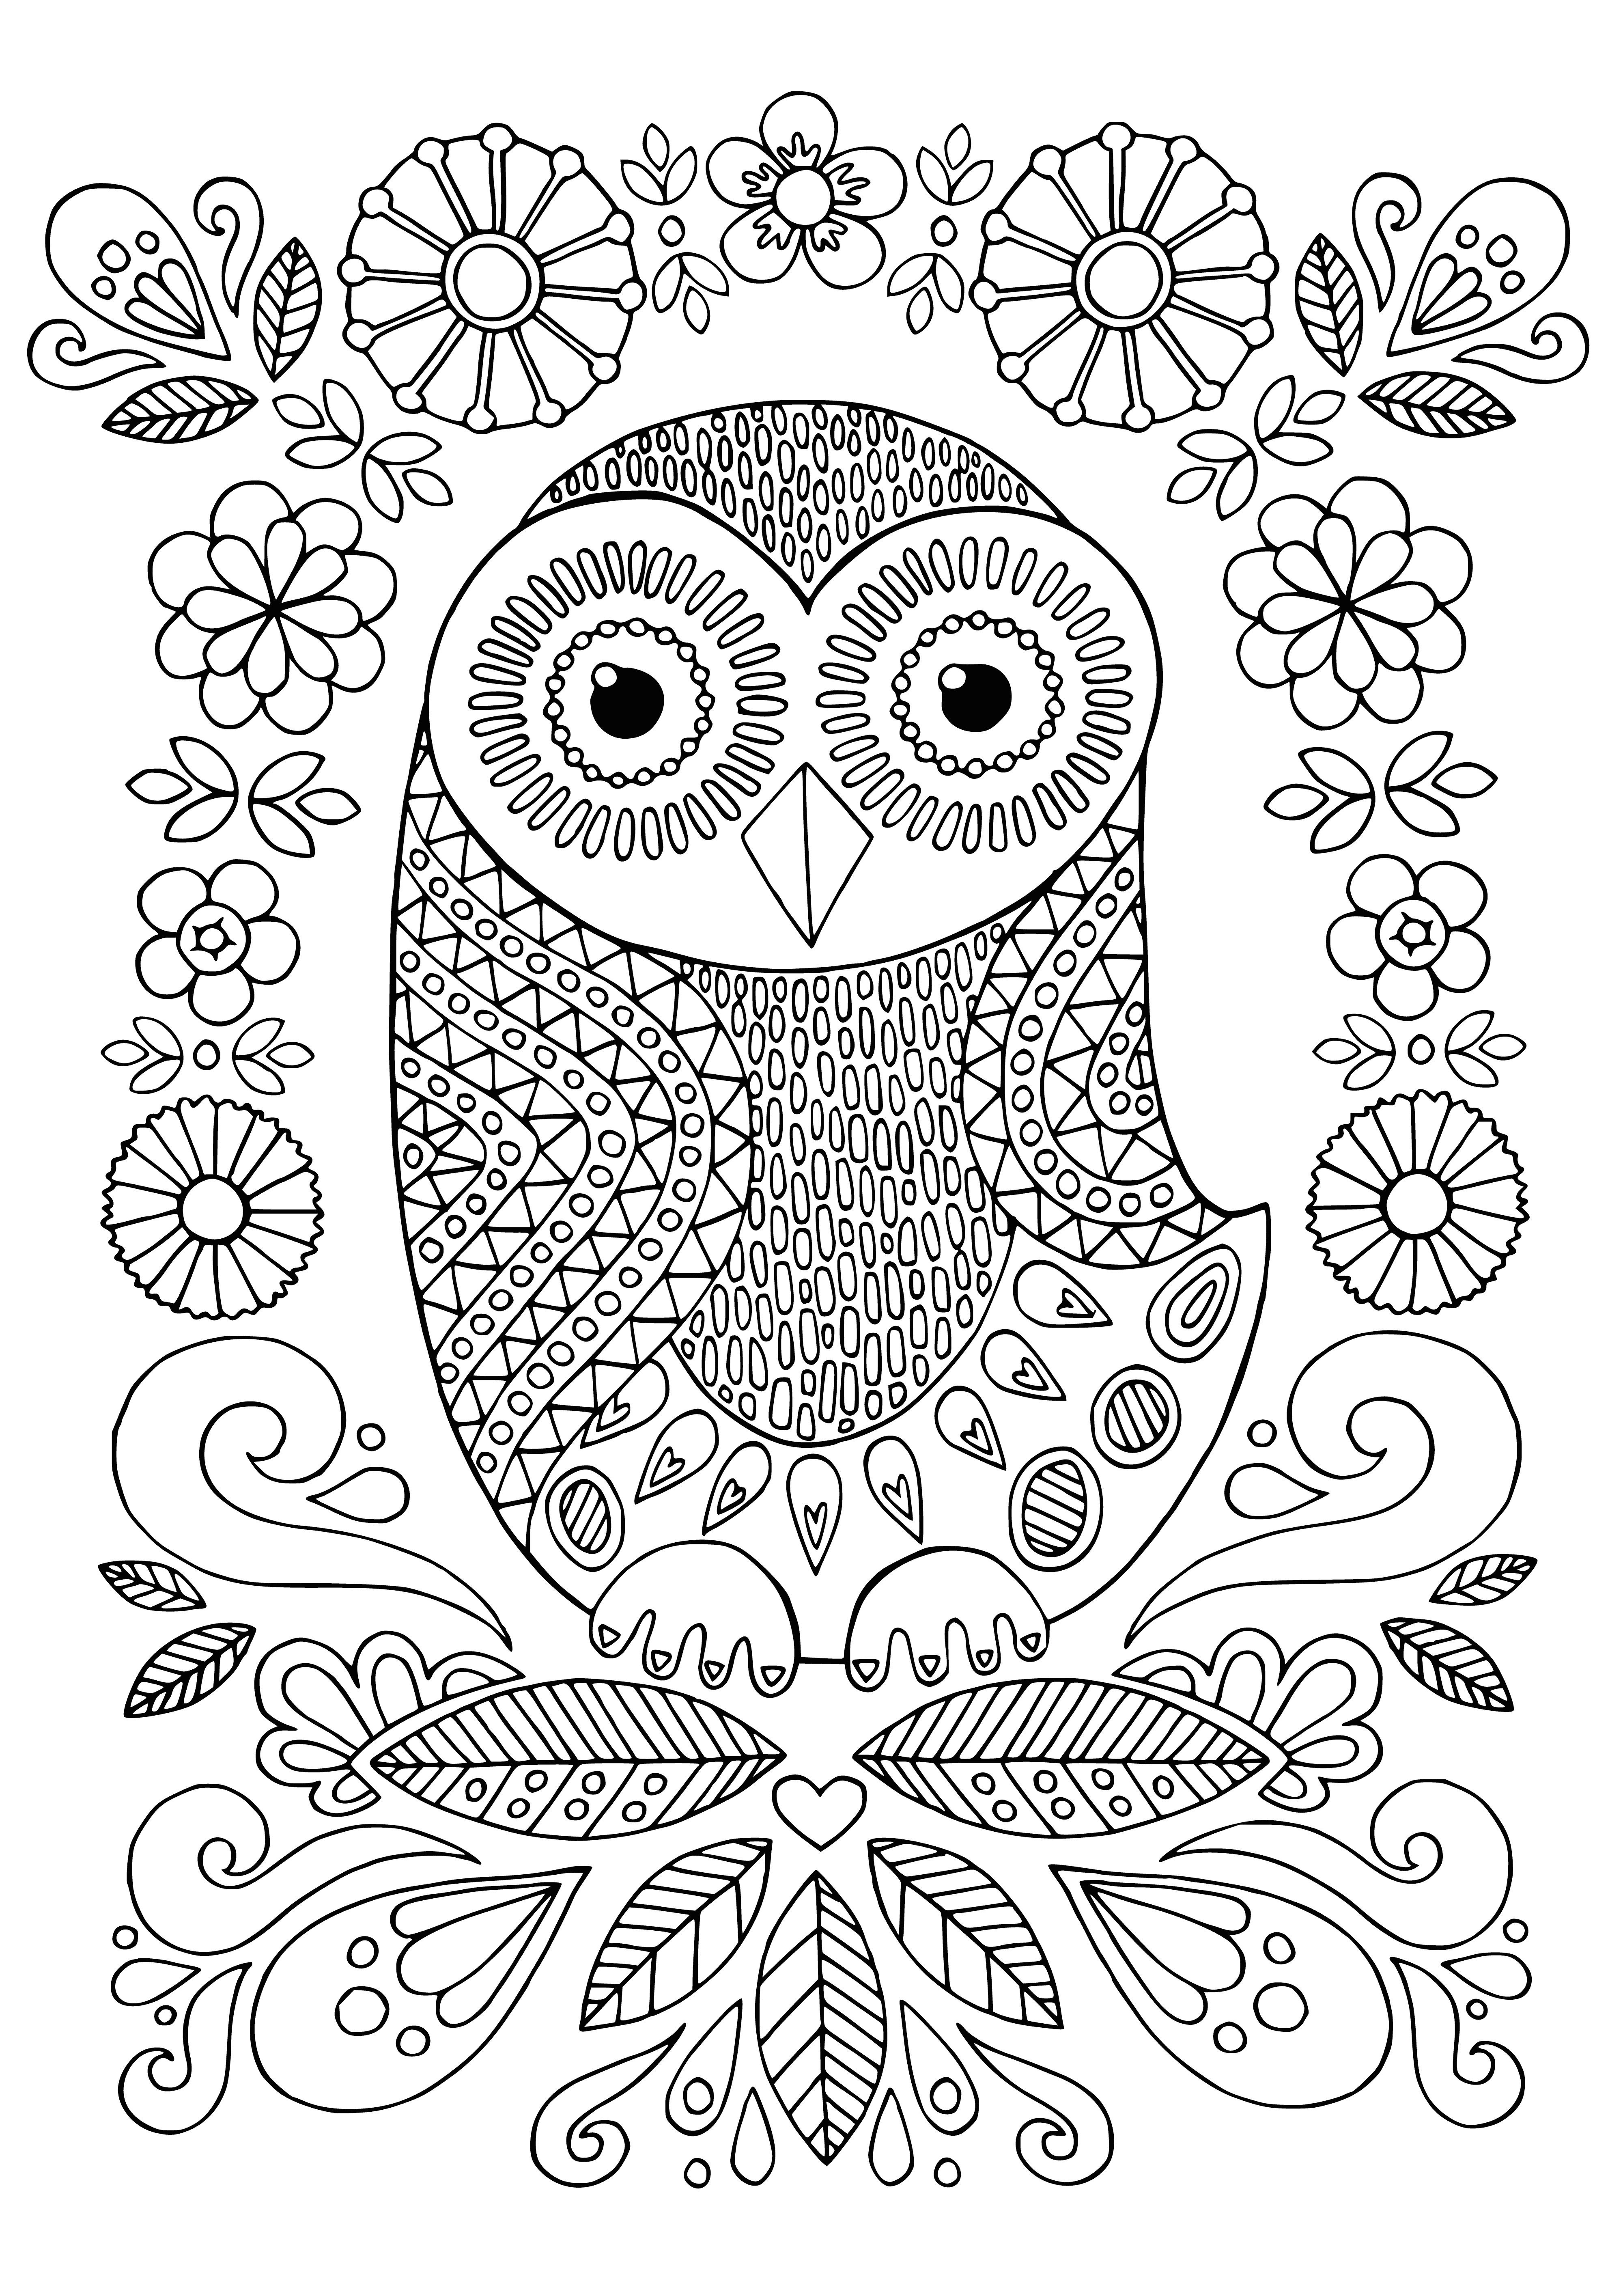 coloring page: Owl perches atop branch, camouflage of browns, blacks & whites. Sharp, deadly claws can tear prey apart.